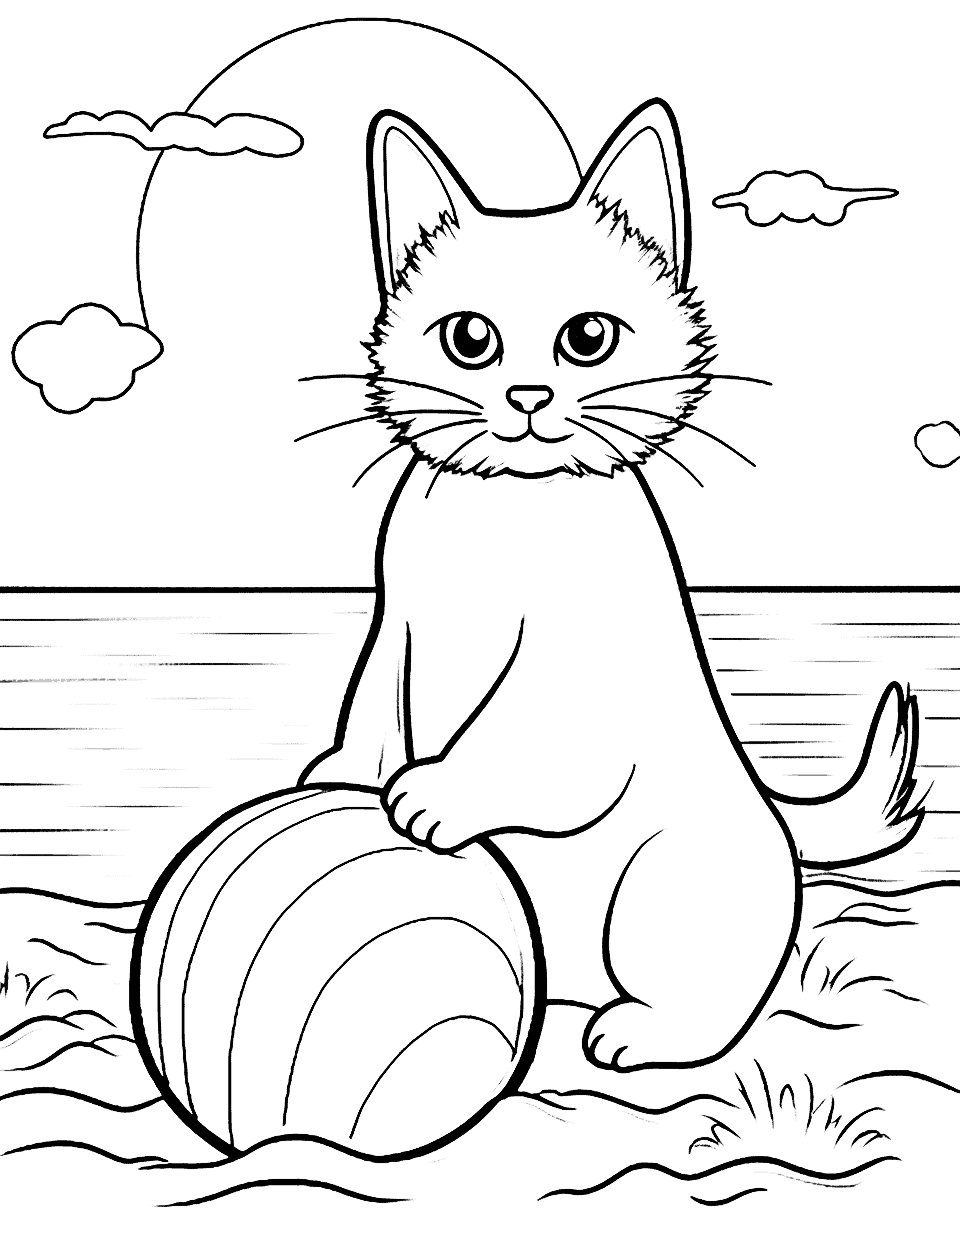 Summer Cat With a Beach Ball Coloring Page - A cat playfully batting at a colorful beach ball, with a bright summer sky in the background.